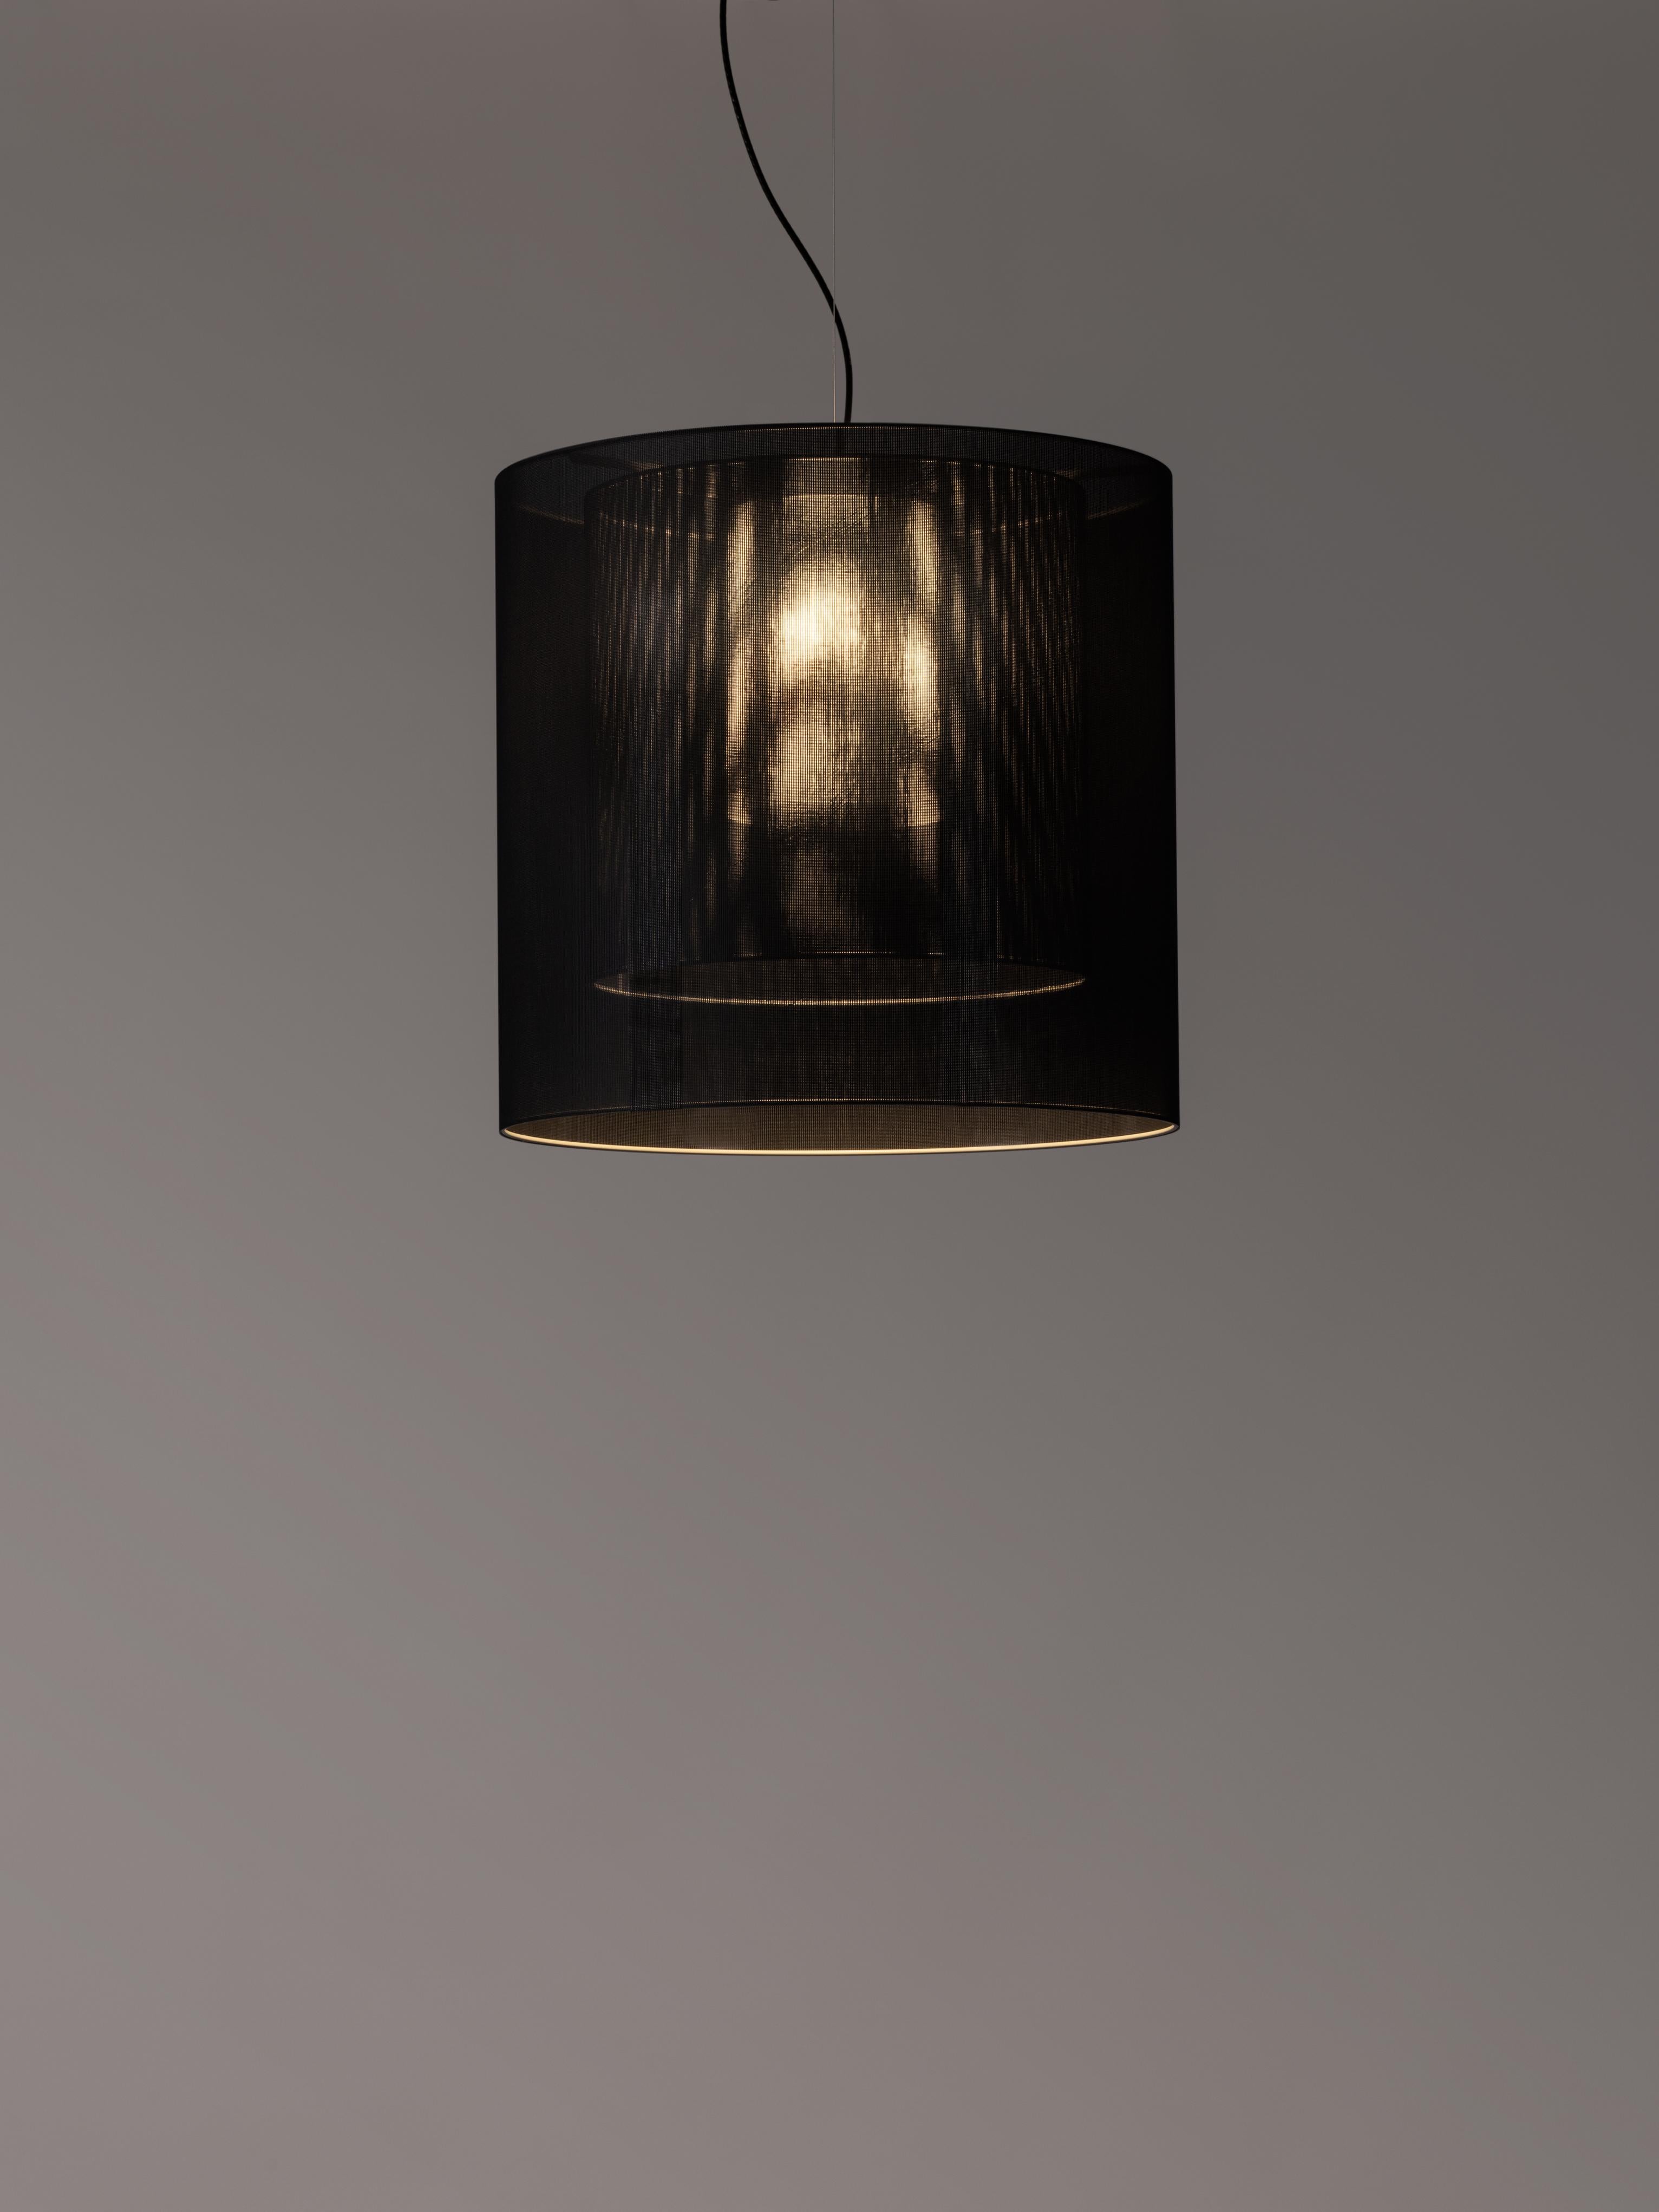 Black Moaré LM pendant lamp by Antoni Arola
Dimensions: D 62 x H 60 cm
Materials: Metal, polyester.
Available in other colors and sizes.

Moaré’s multiple combinations of formats and colours make it highly versatile. The series takes its name